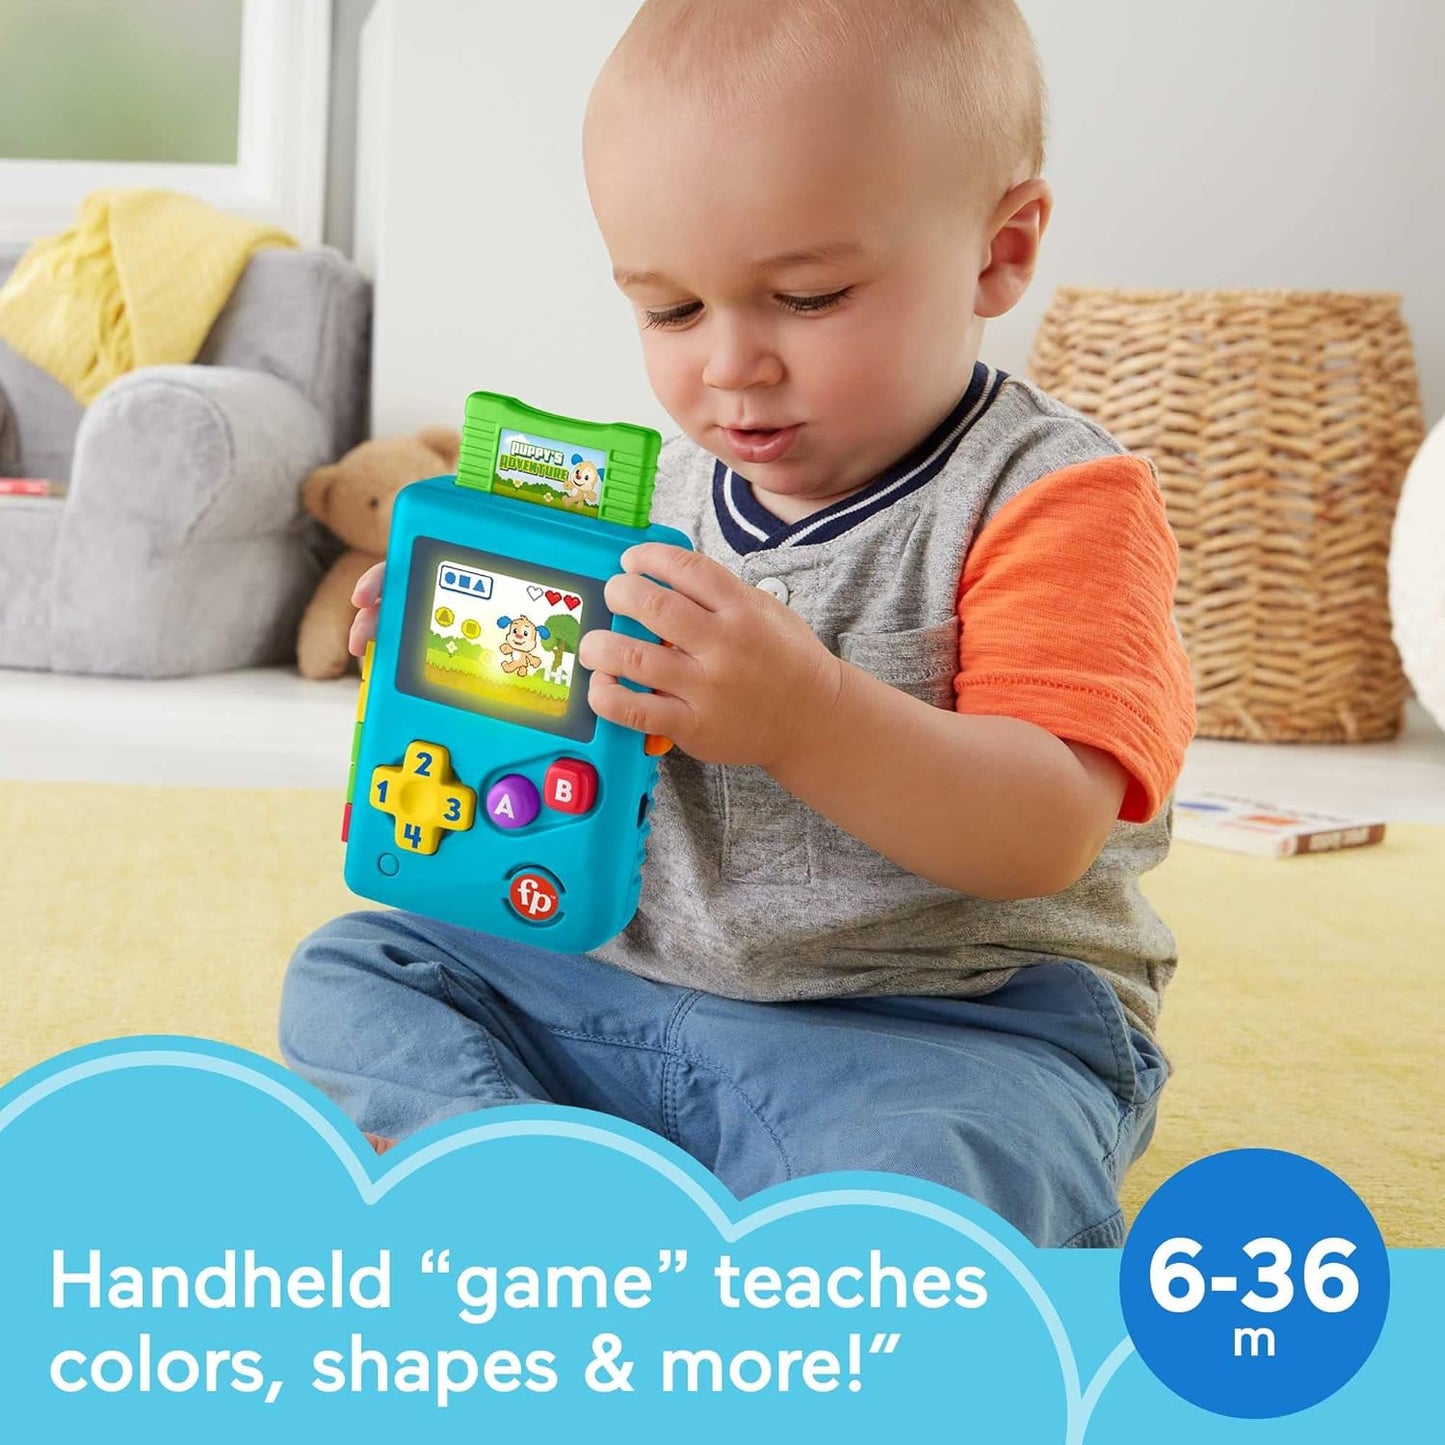 Fisher-Price Laugh & Learn Baby & Toddler Toy Lil’ Gamer Pretend Video Game with Lights & Learning Songs for Ages 6+ Months,Blue